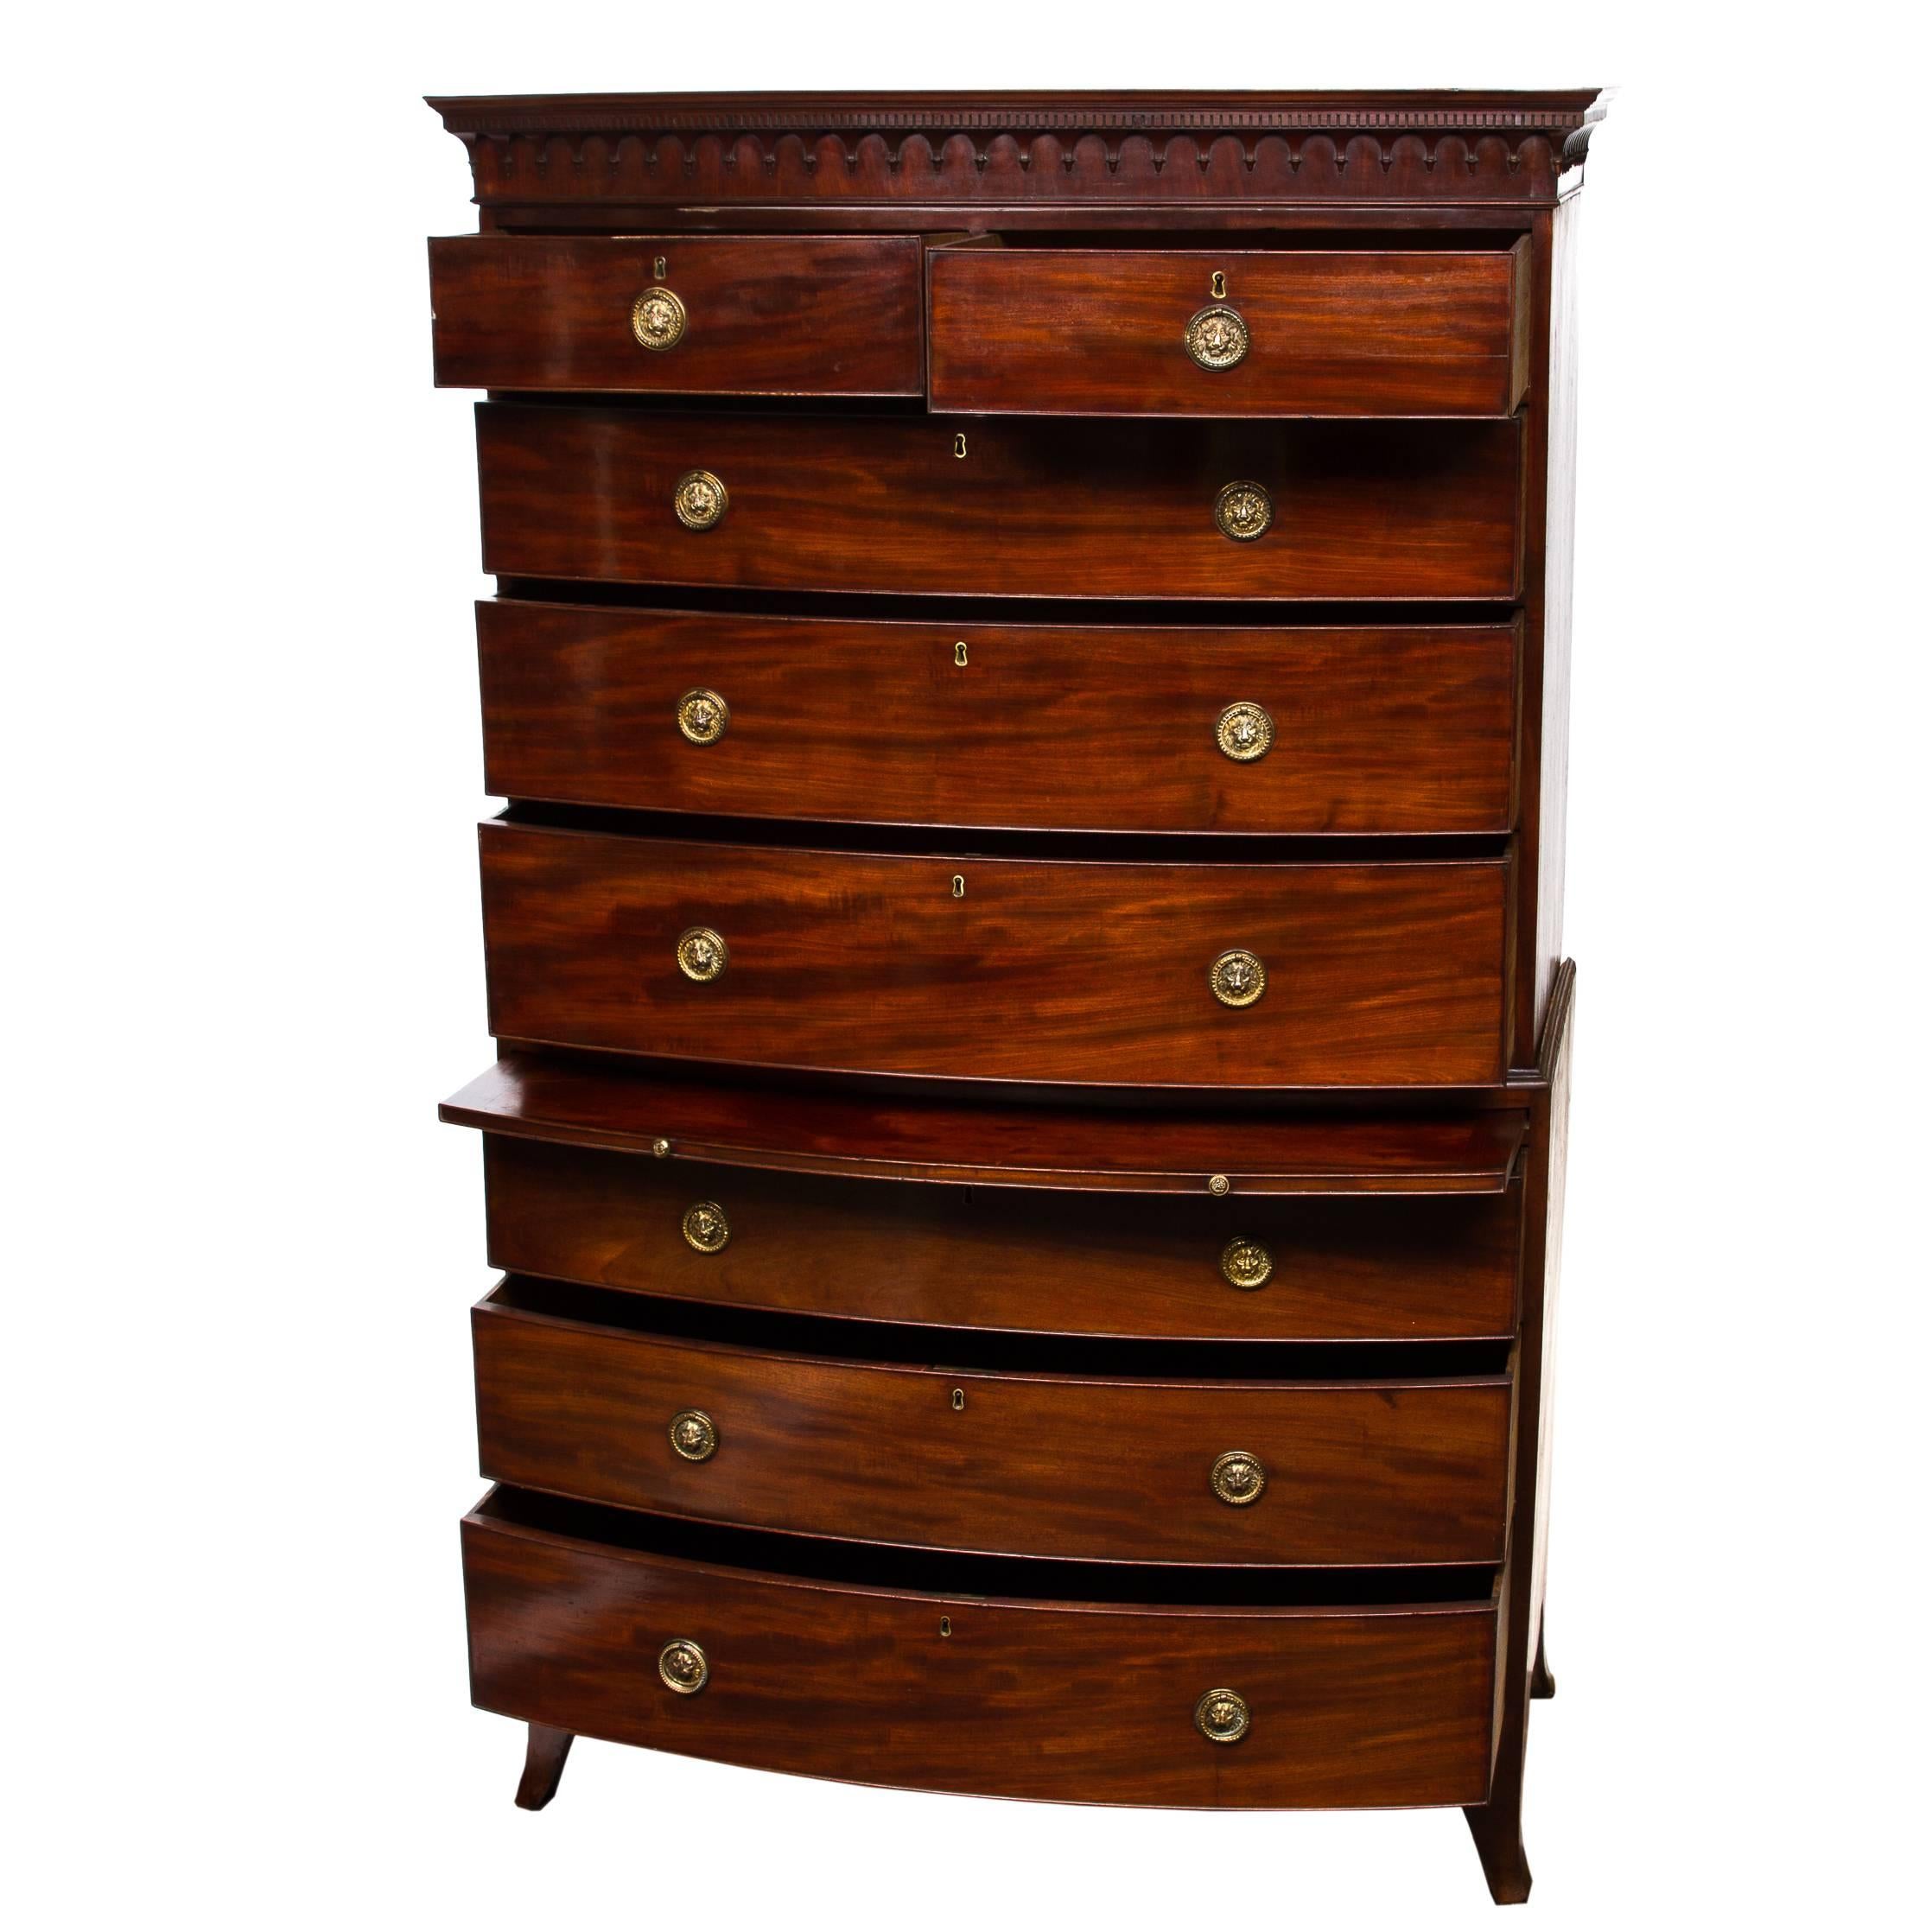 19th century English bow front three-piece chest on chest with a pull-out linen folding slide. Beautiful mahogany wood with subtle figuring. Top crown has dentil, egg and dart molding. Middle section five functional drawers, each with round brass